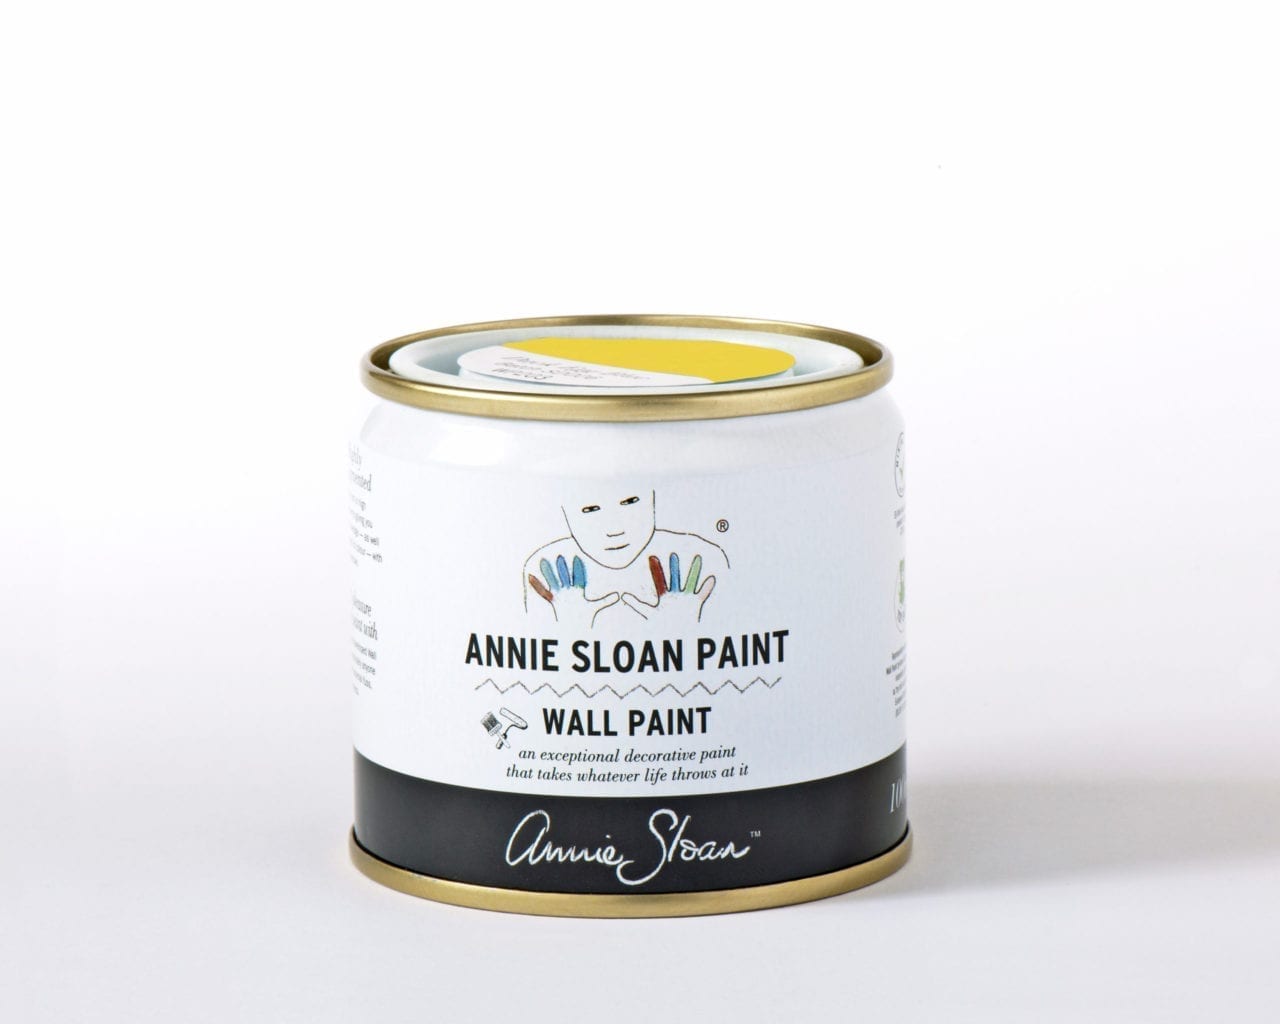 100ml tester tin of Wall Paint by Annie Sloan in English Yellow, a bright traditional yellow